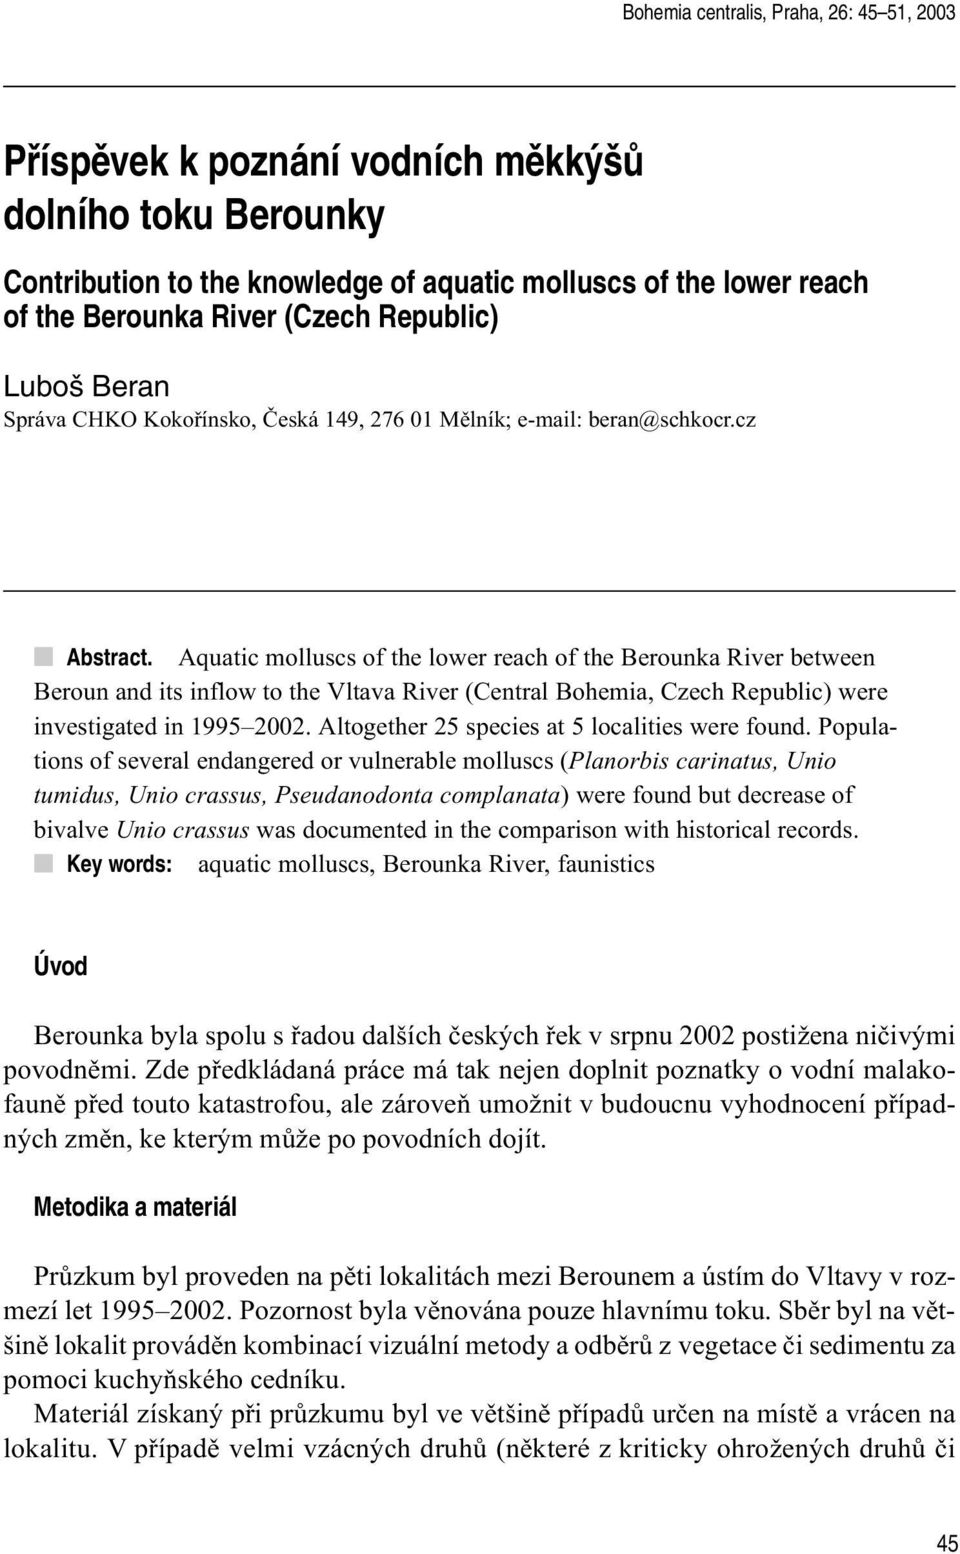 Aquatic molluscs of the lower reach of the Berounka River between Beroun and its inflow to the Vltava River (Central Bohemia, Czech Republic) were investigated in 1995 2002.